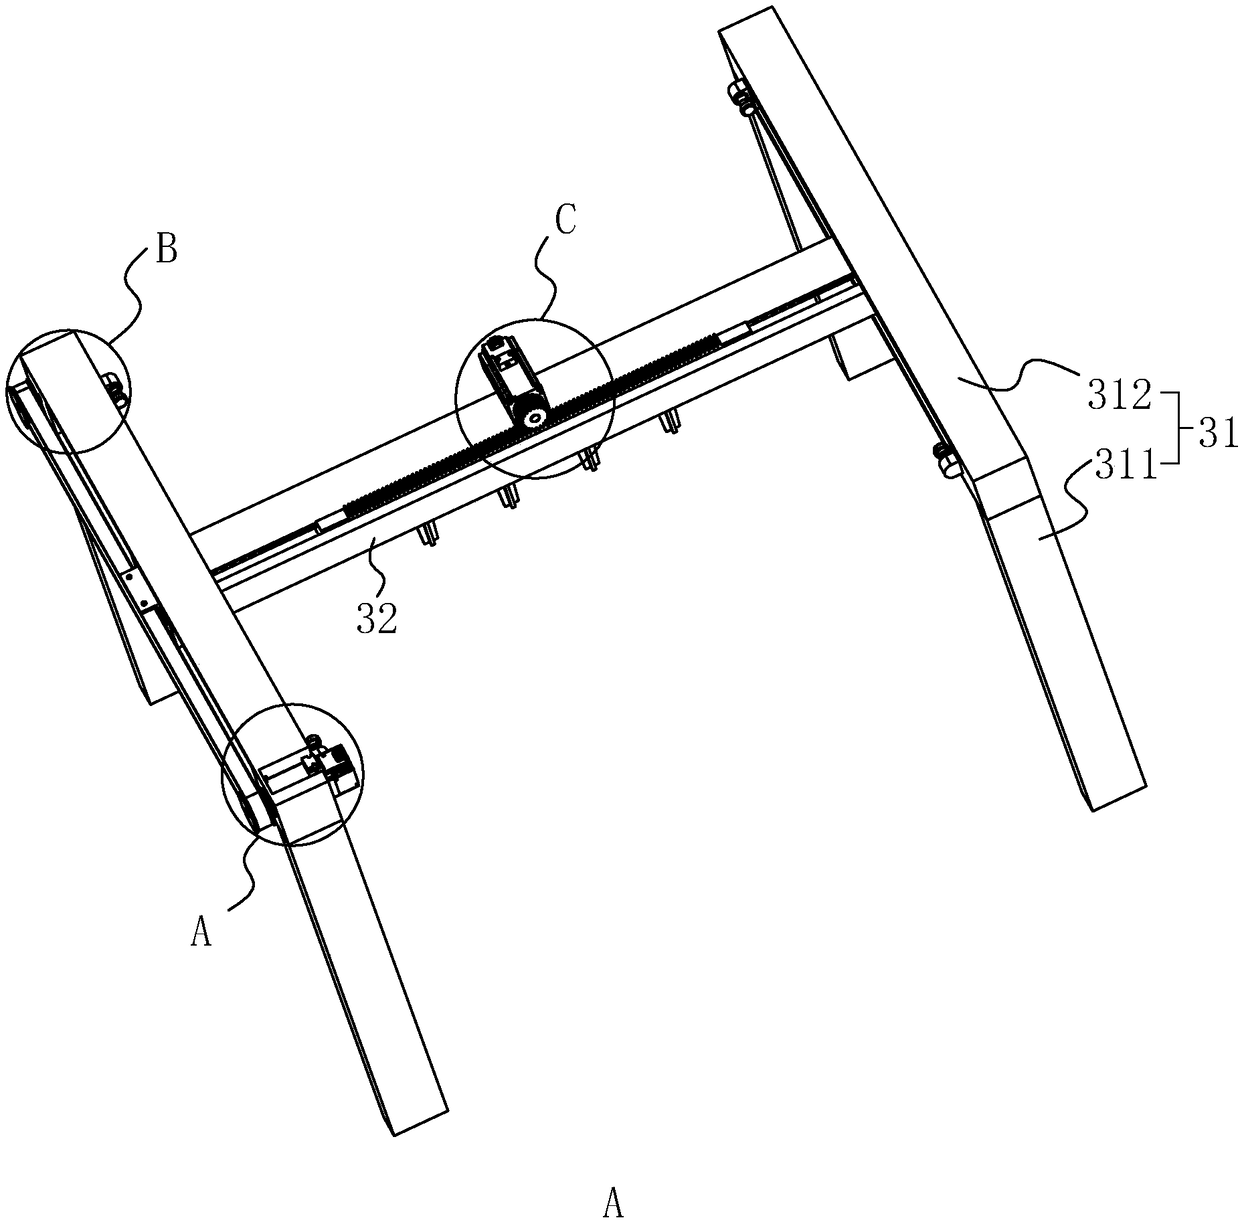 Test device for confirming electromagnetic performance of measured object